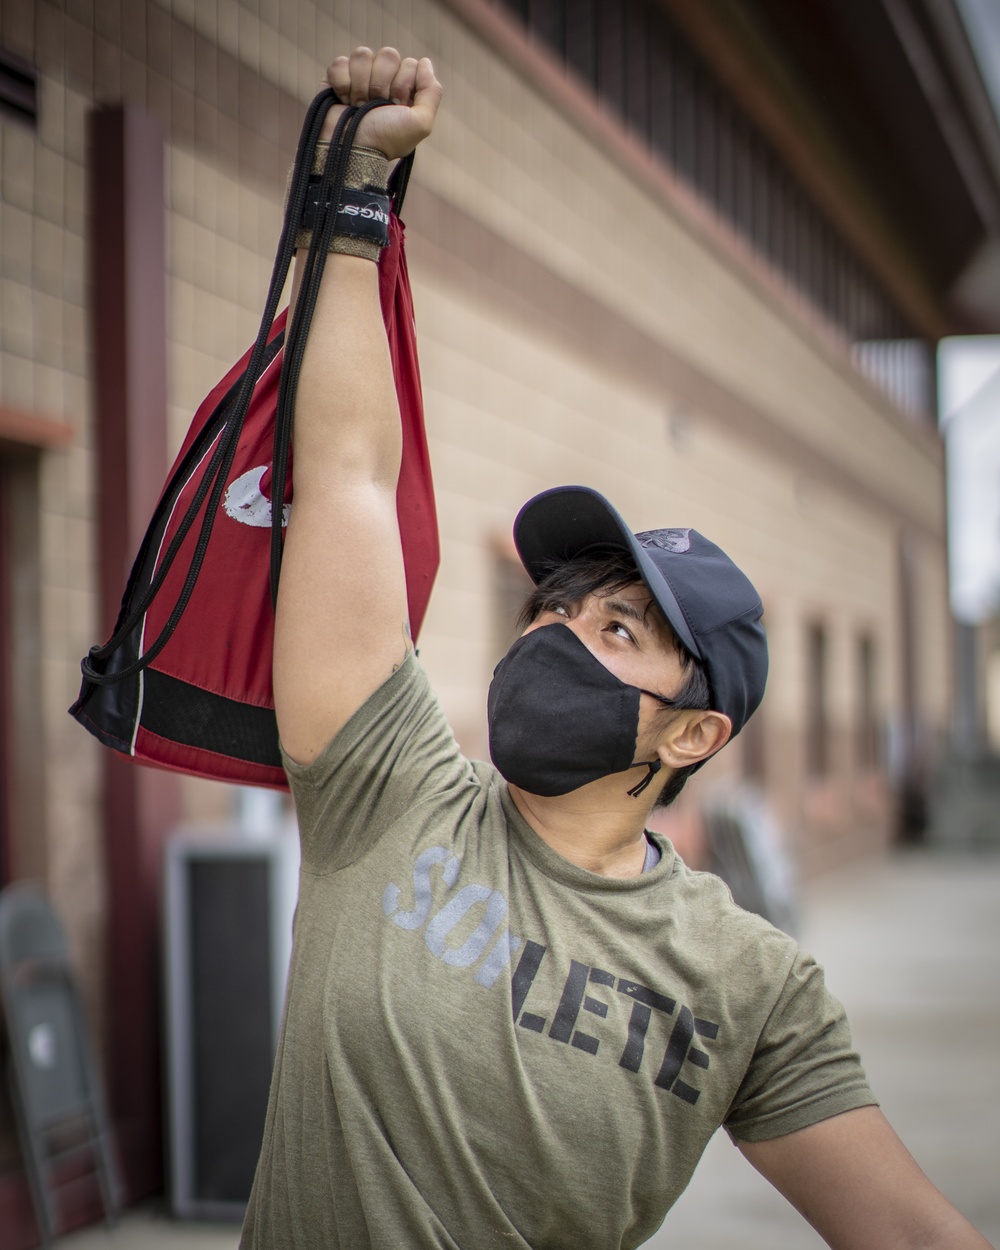 A U.S. Marine lifts a weighted bag during an adaptive physical training event 